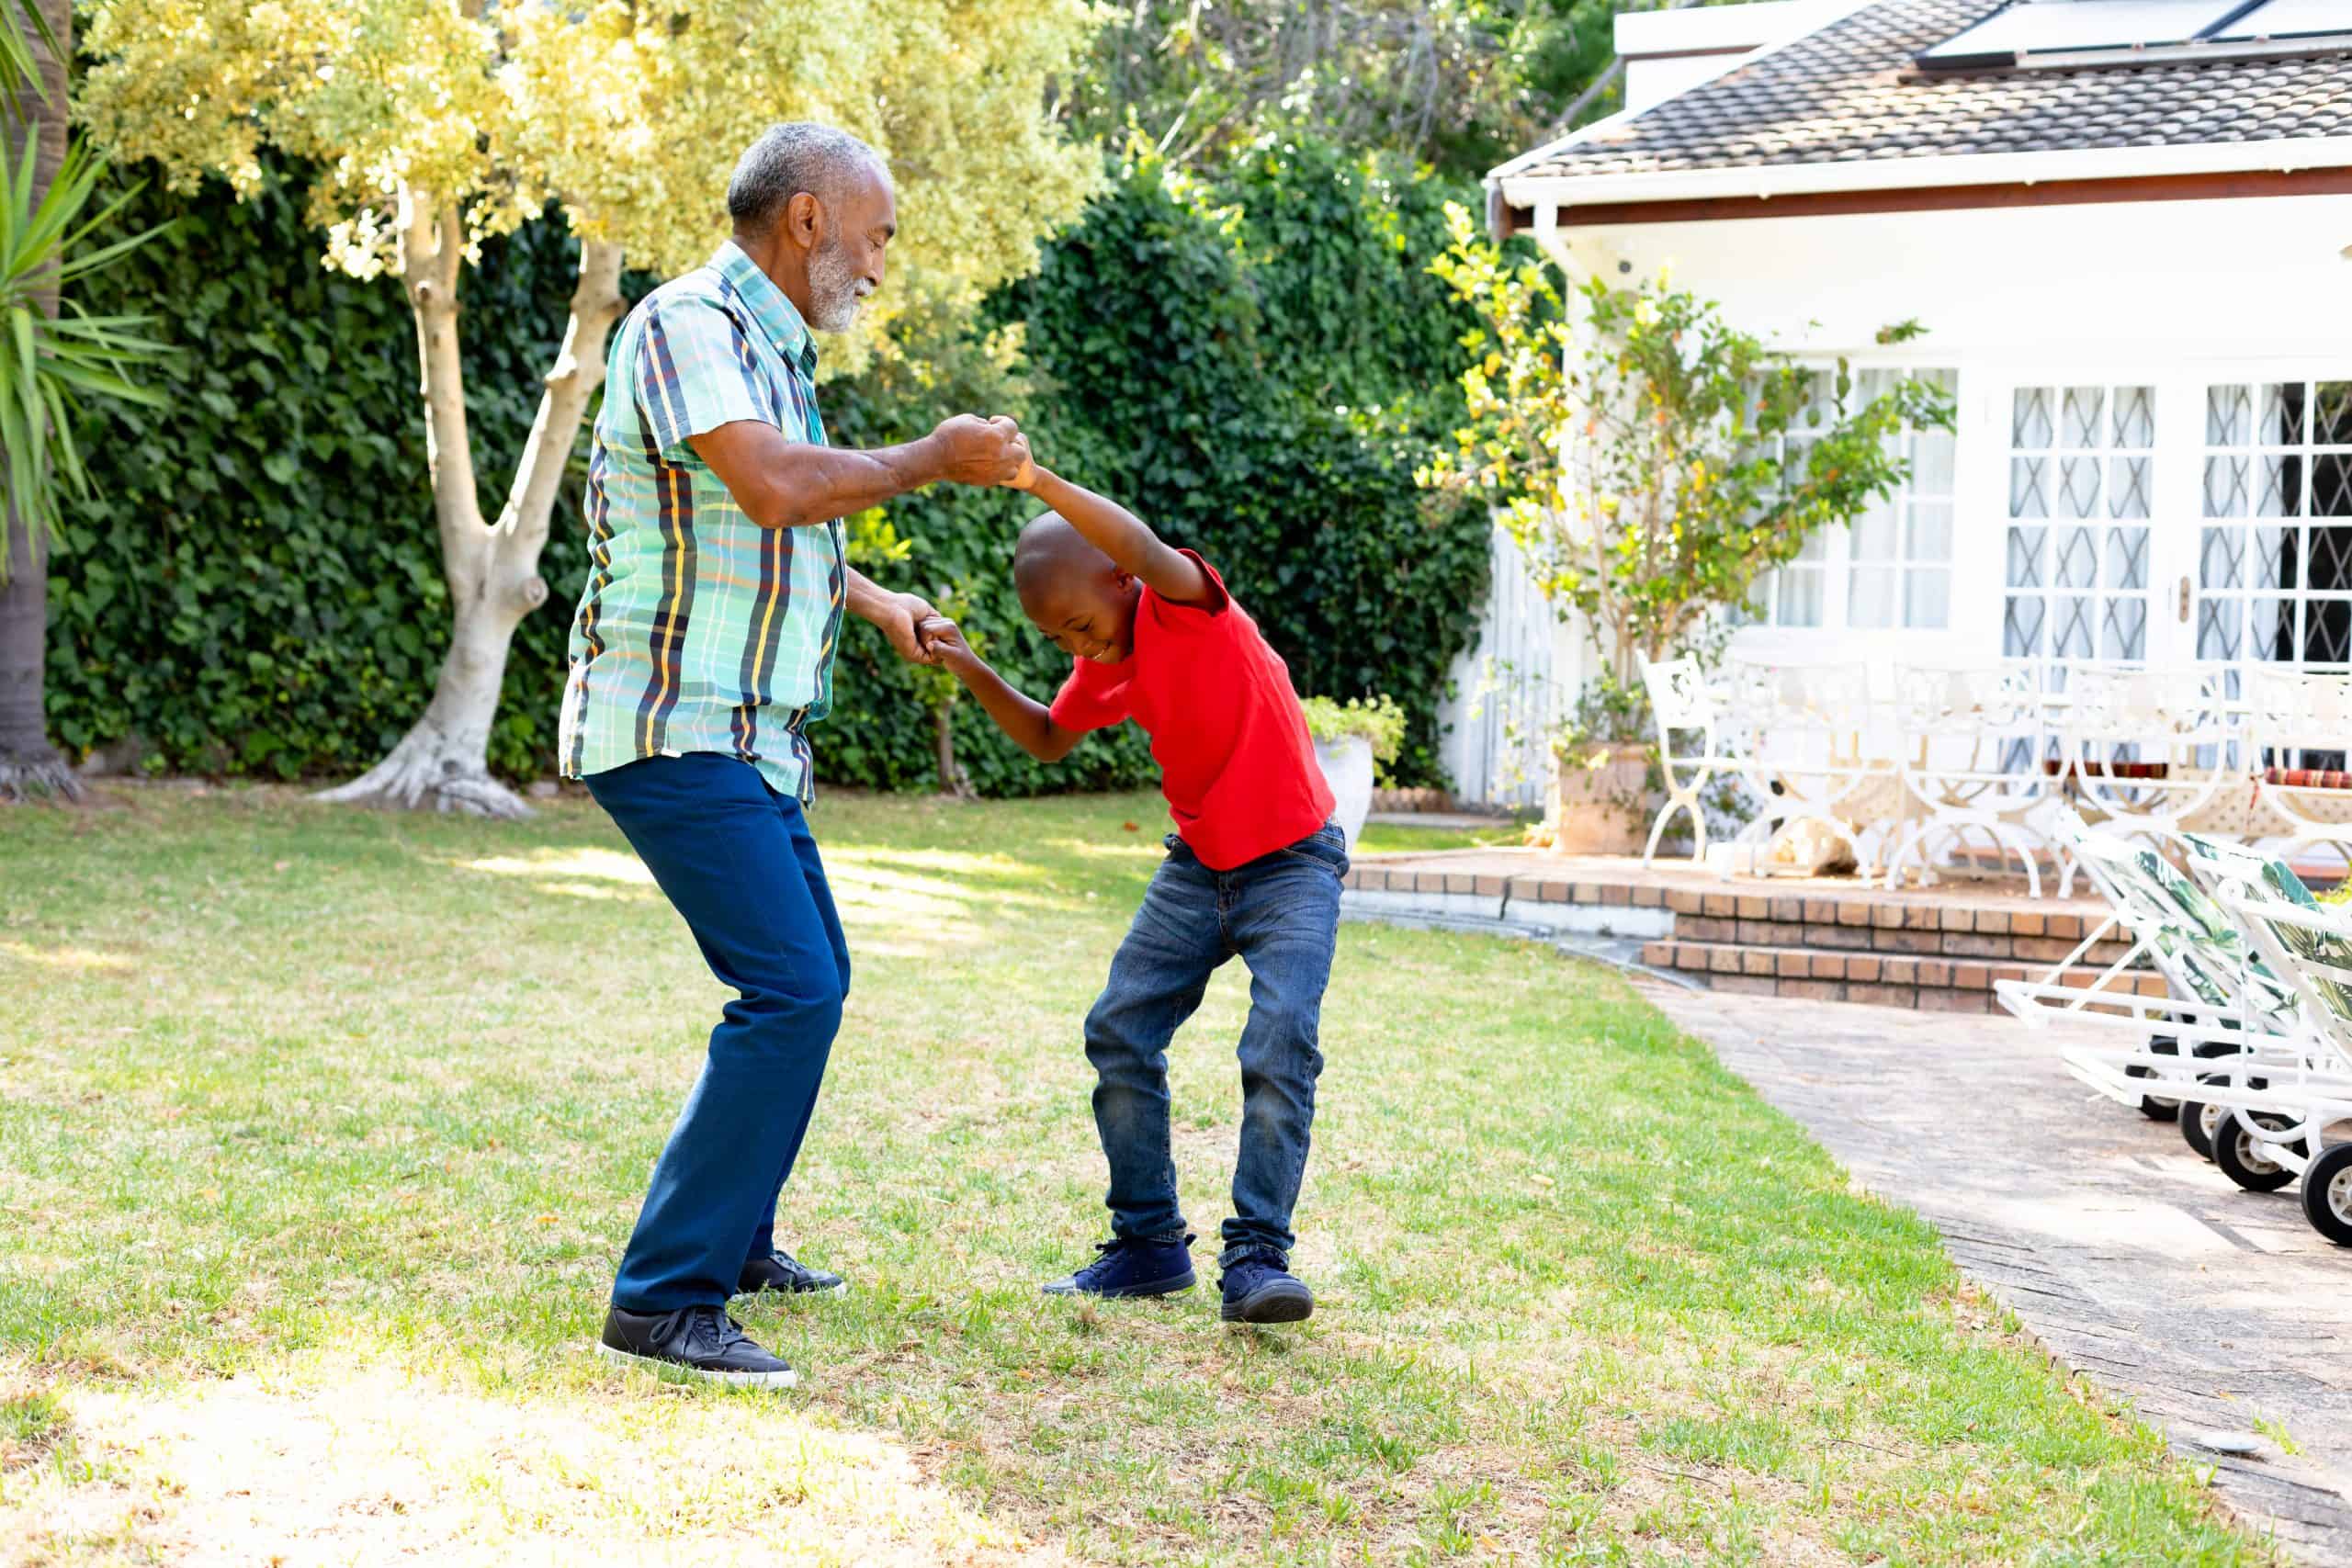 Senior man spending time with his grandson in their garden on a sunny day, teaching him dancing on the lawn.